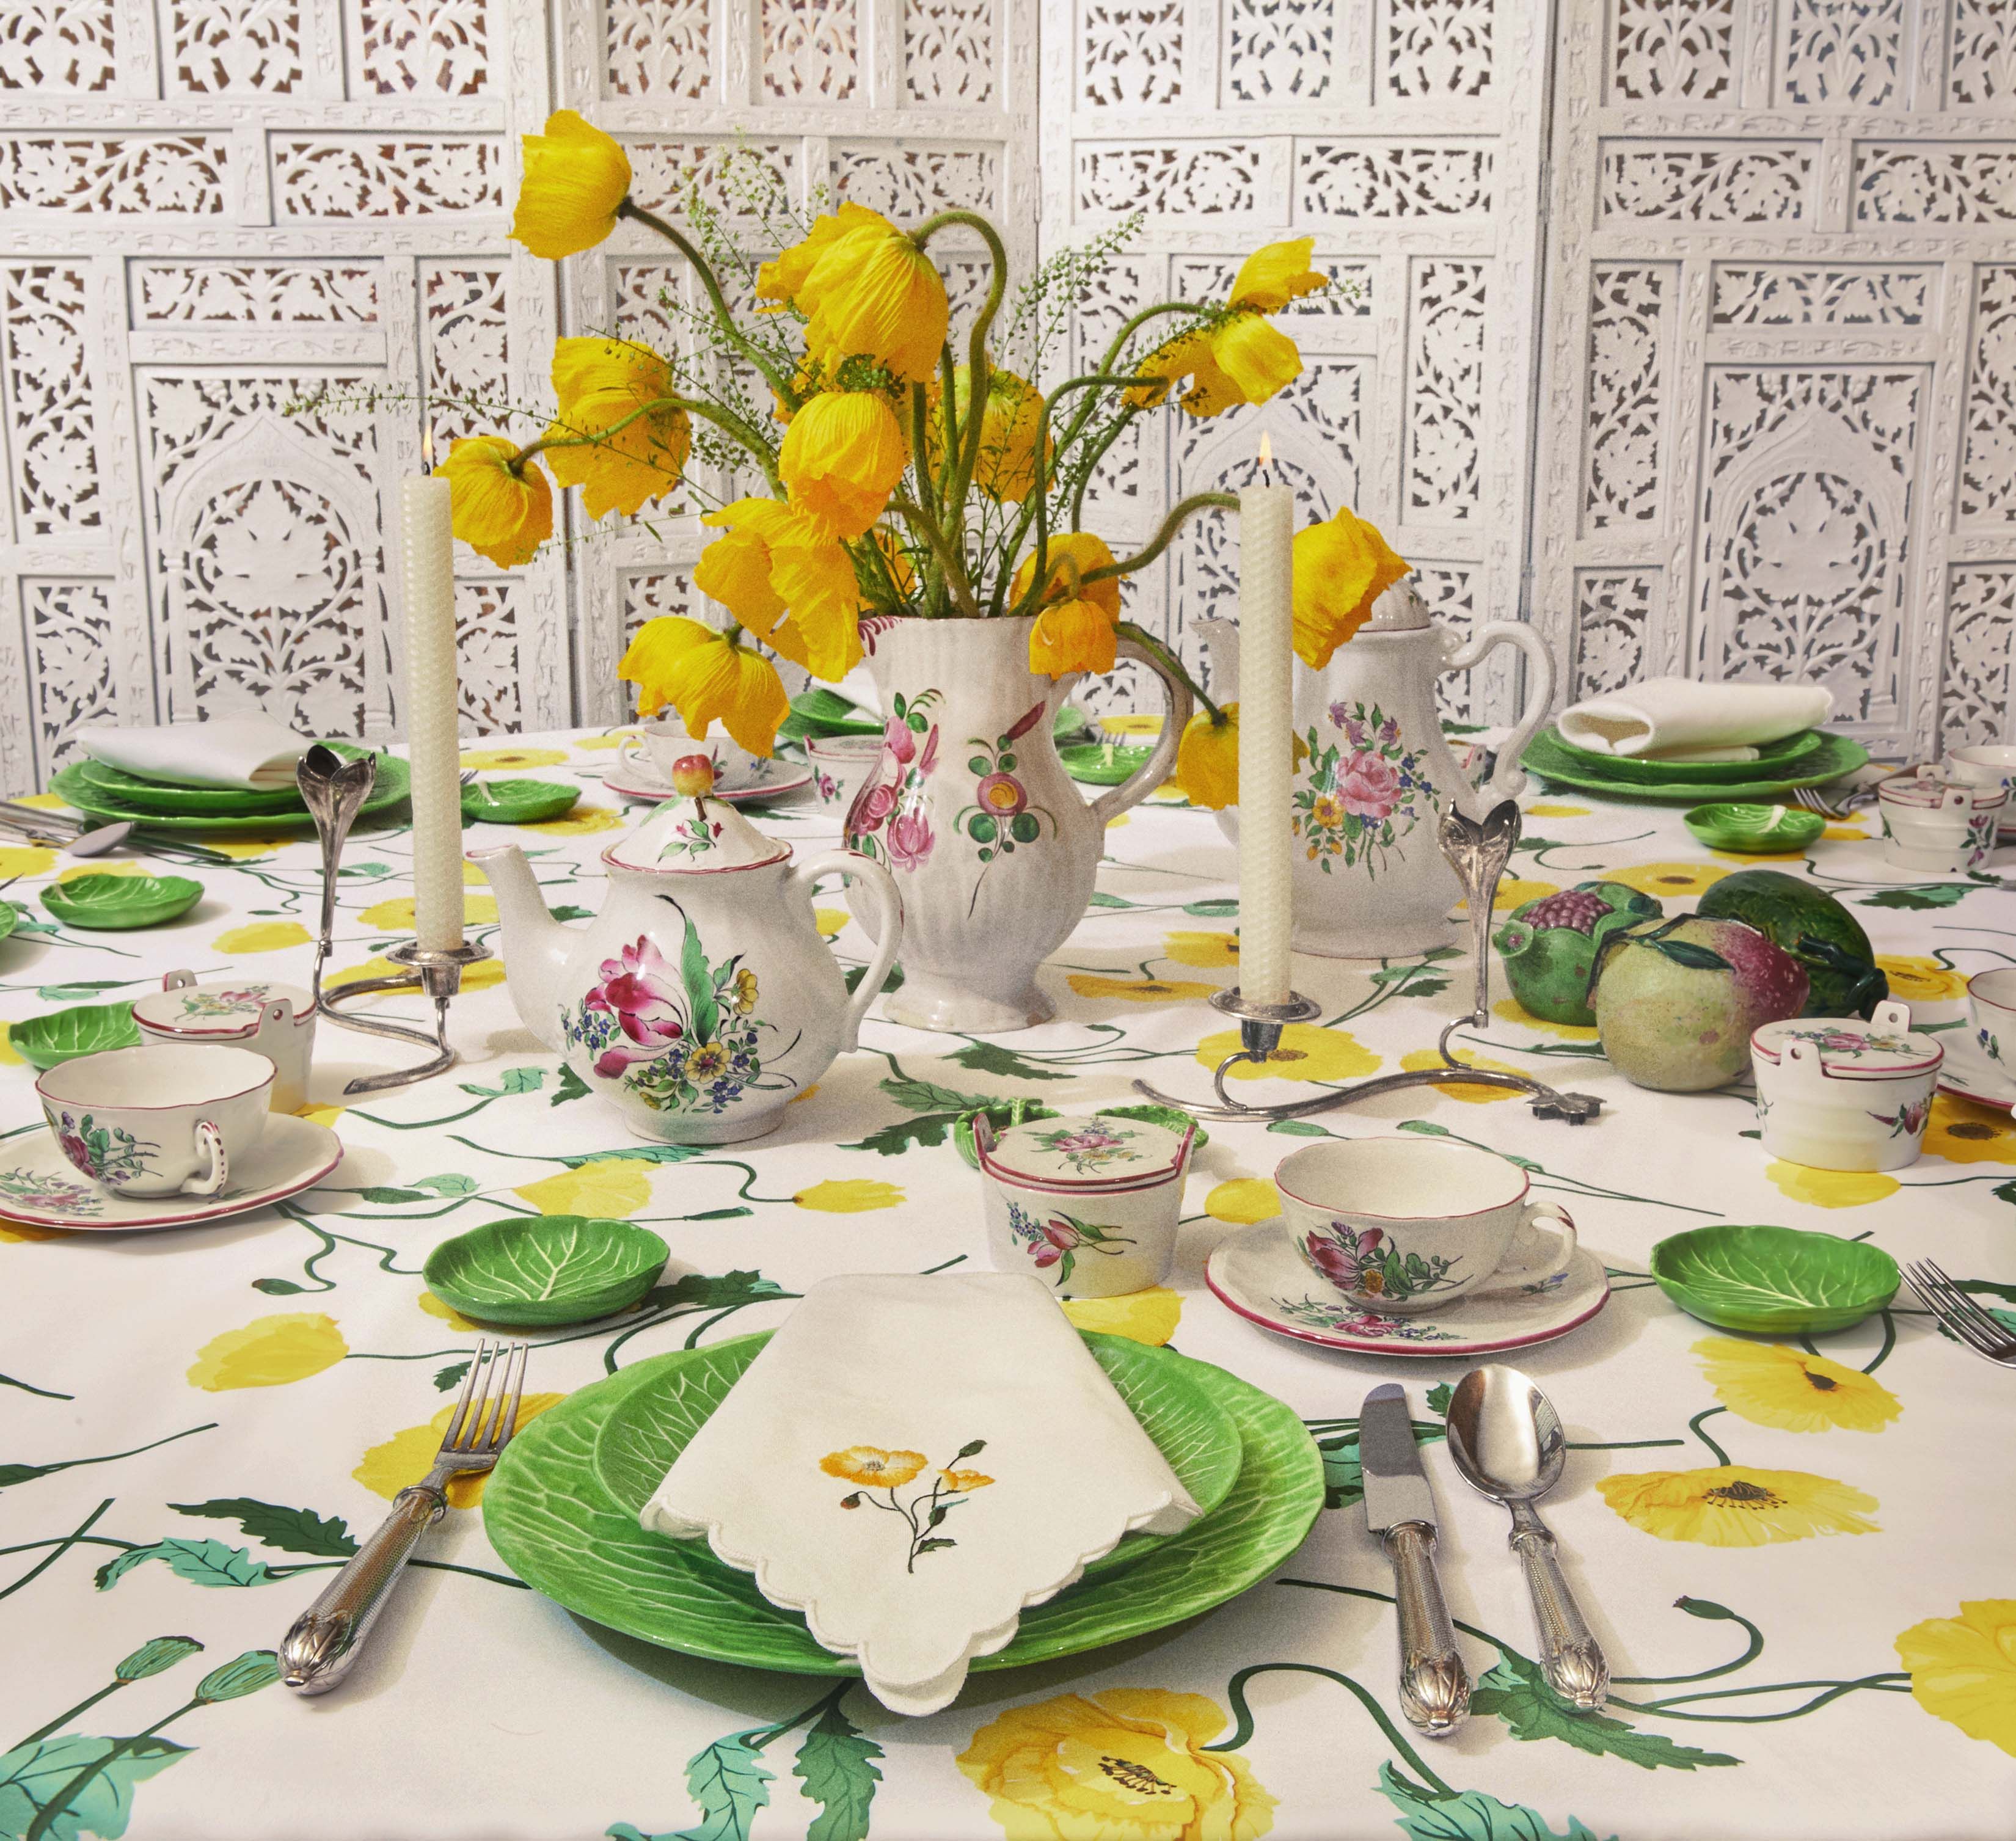 Now You Can Decorate Your Summer Table with Tory Burch